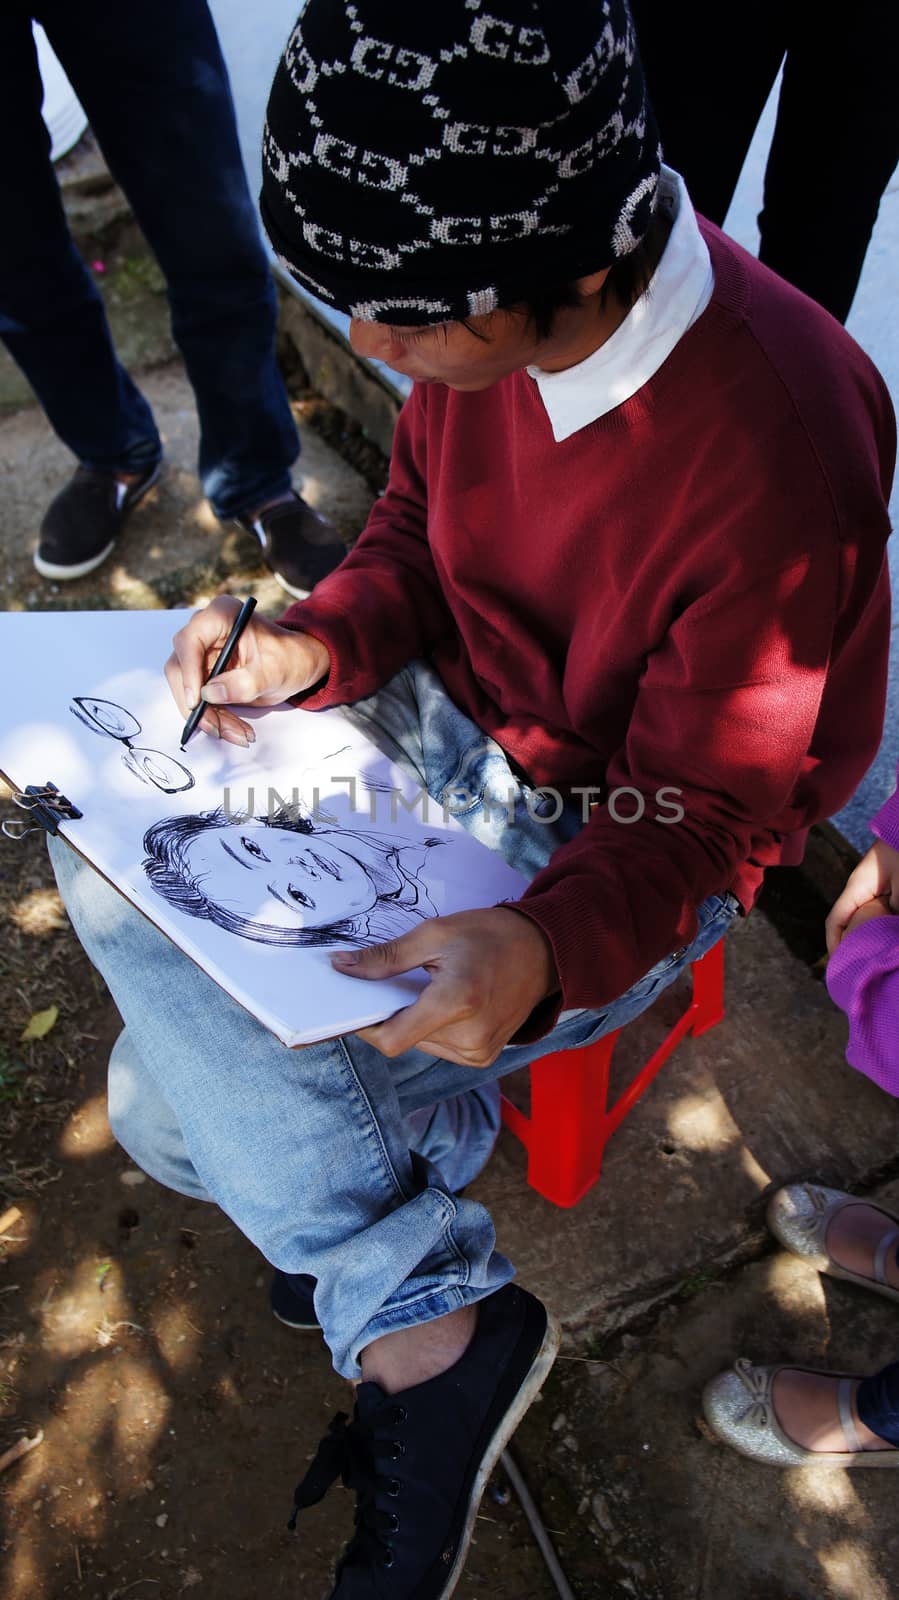 DA LAT, VIET NAM- DEC 27:Pavement artist portray with pencil on white paper for little girl in Dalat, Viet Nam on Dec 27, 2013